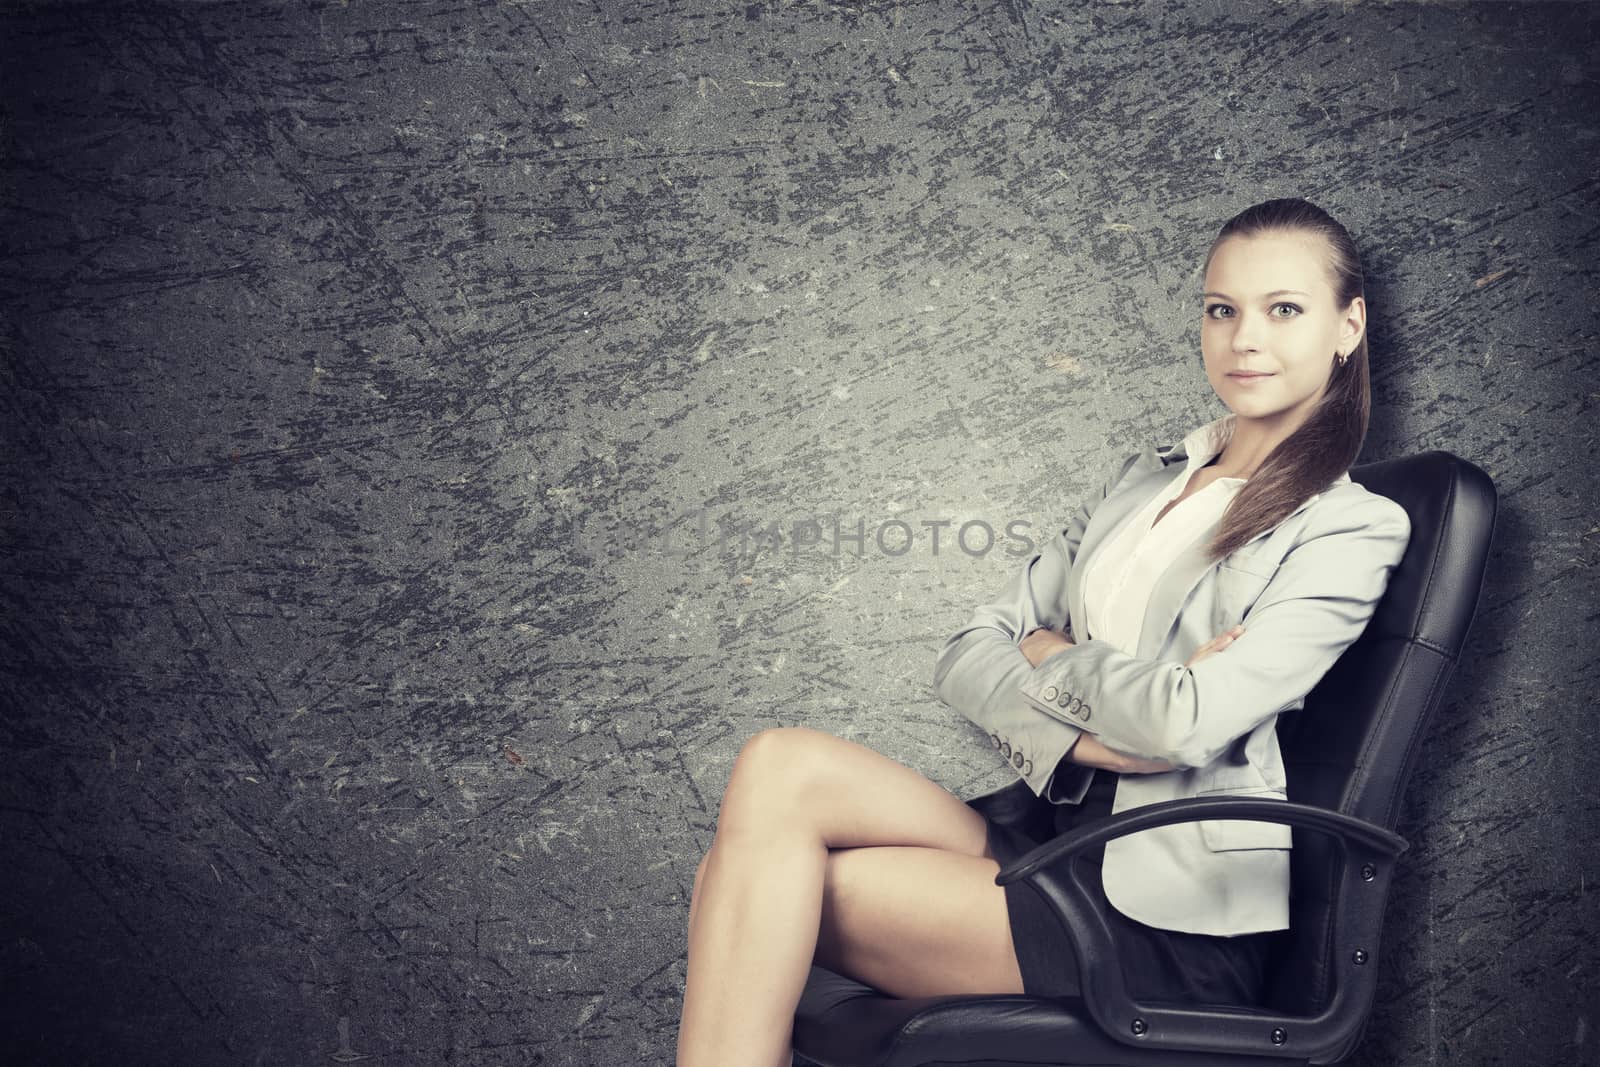 Businesswoman in office chair, looking at camera, over grunge scratchy background